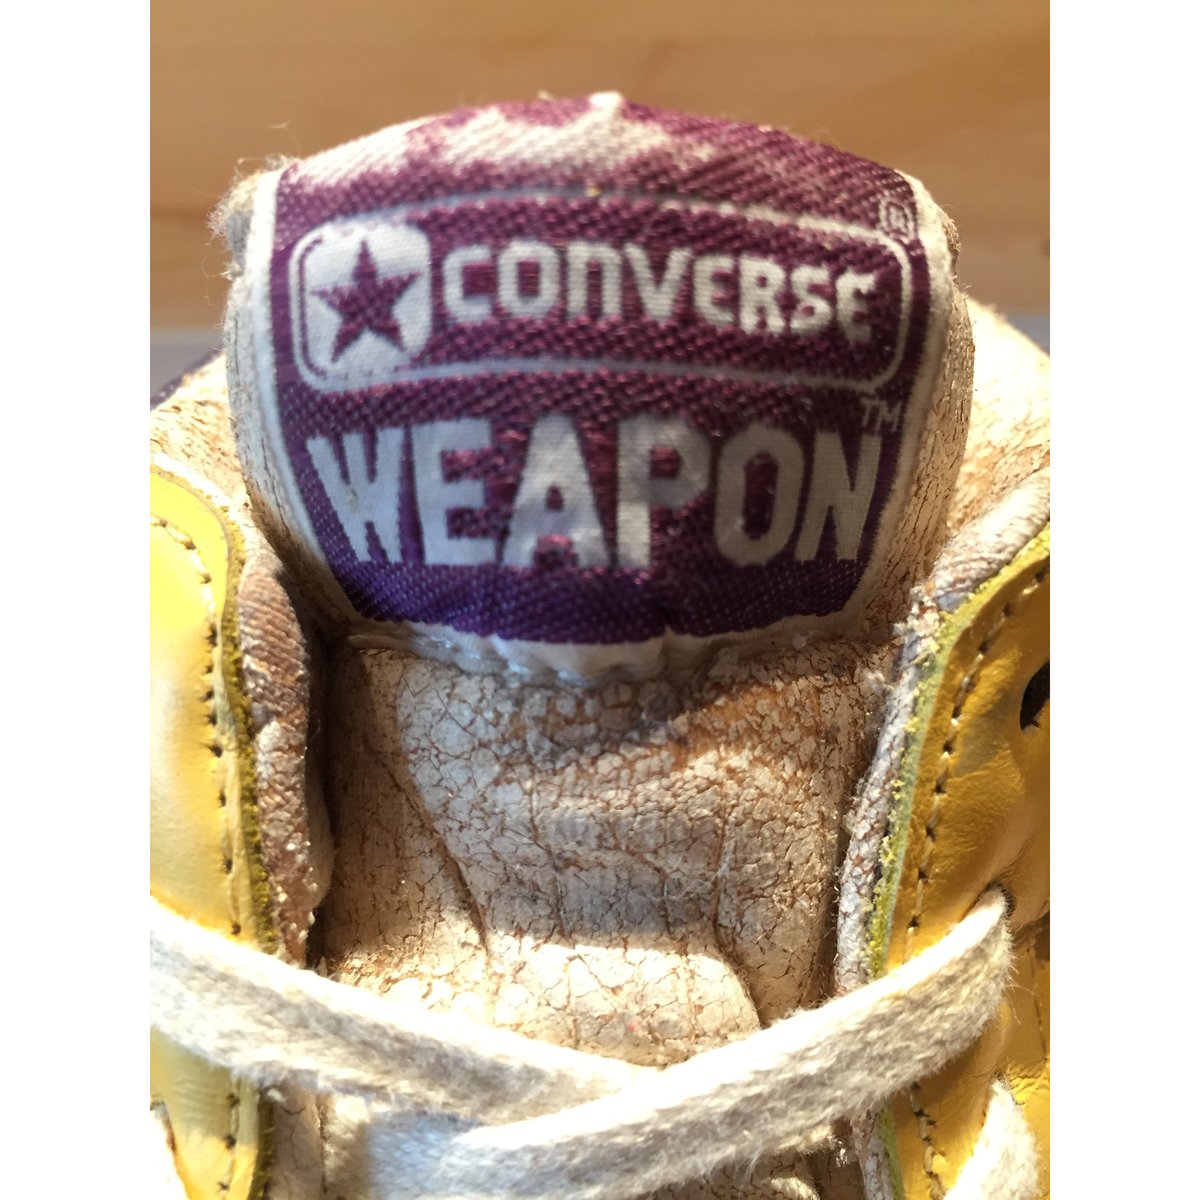 converse weapon レイカーズ　ヴィンテージ加工